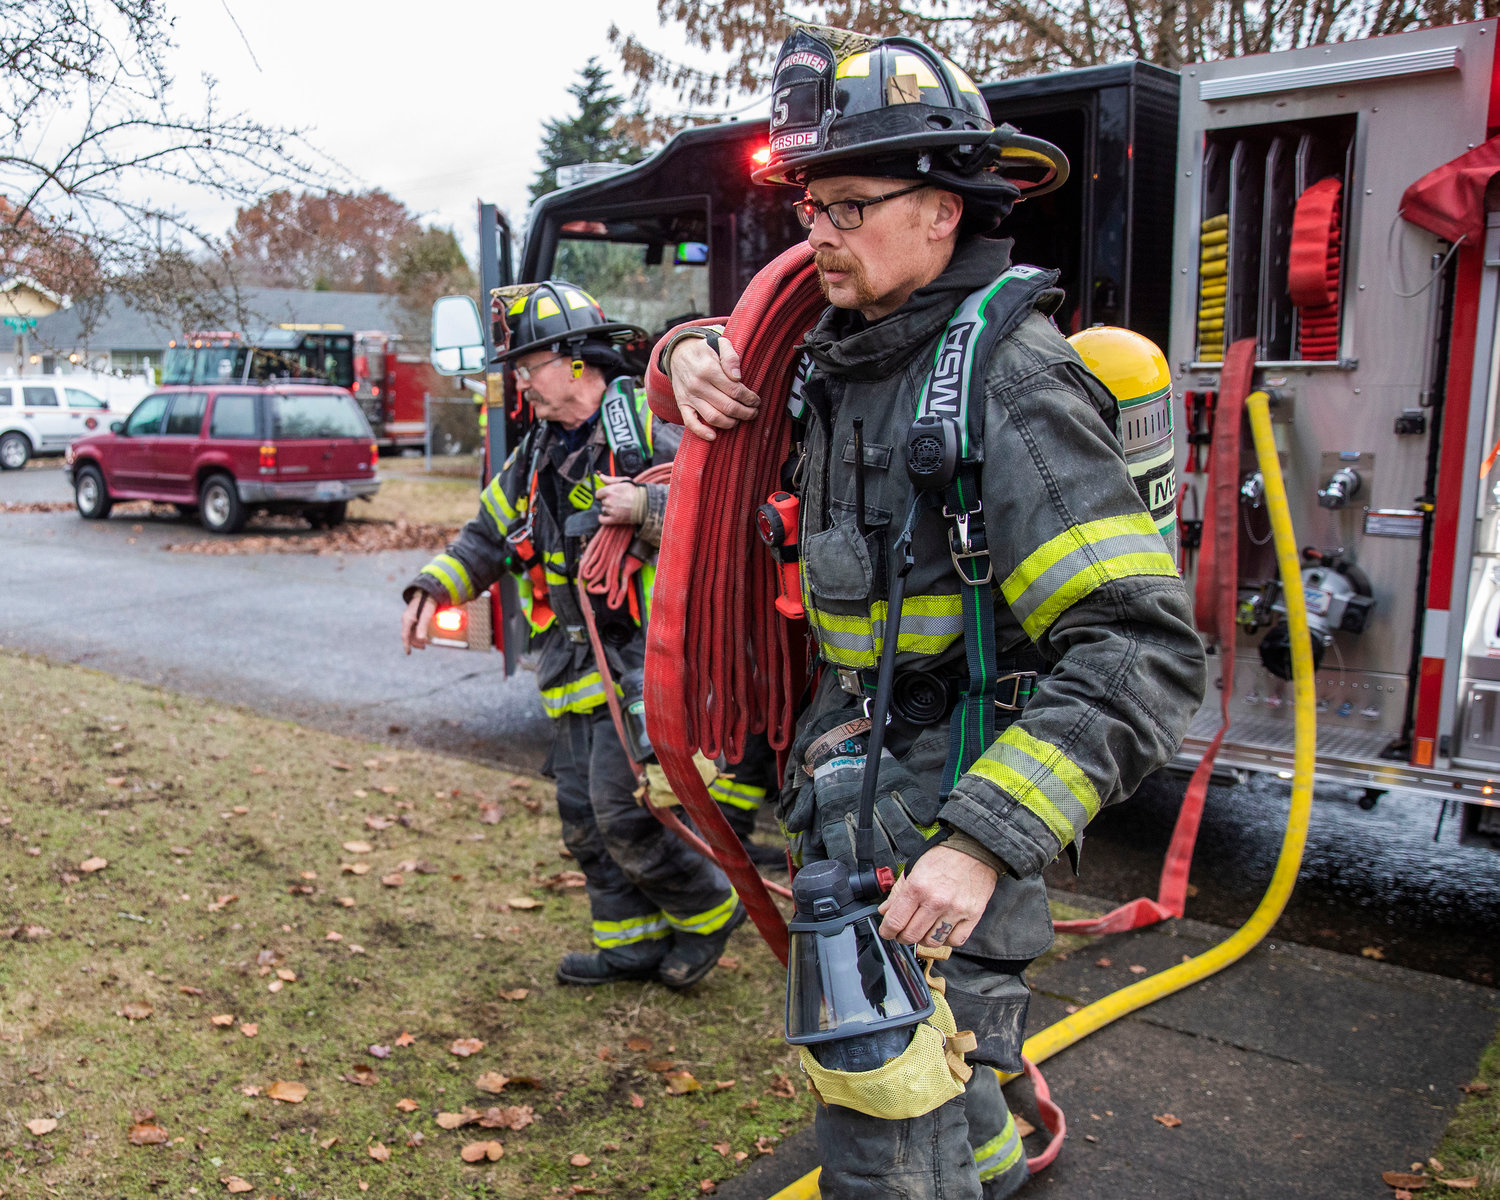 Riverside firefighters carry hoses into a building following a residential fire in the 200 block of North Rock Street in Centralia on Friday.